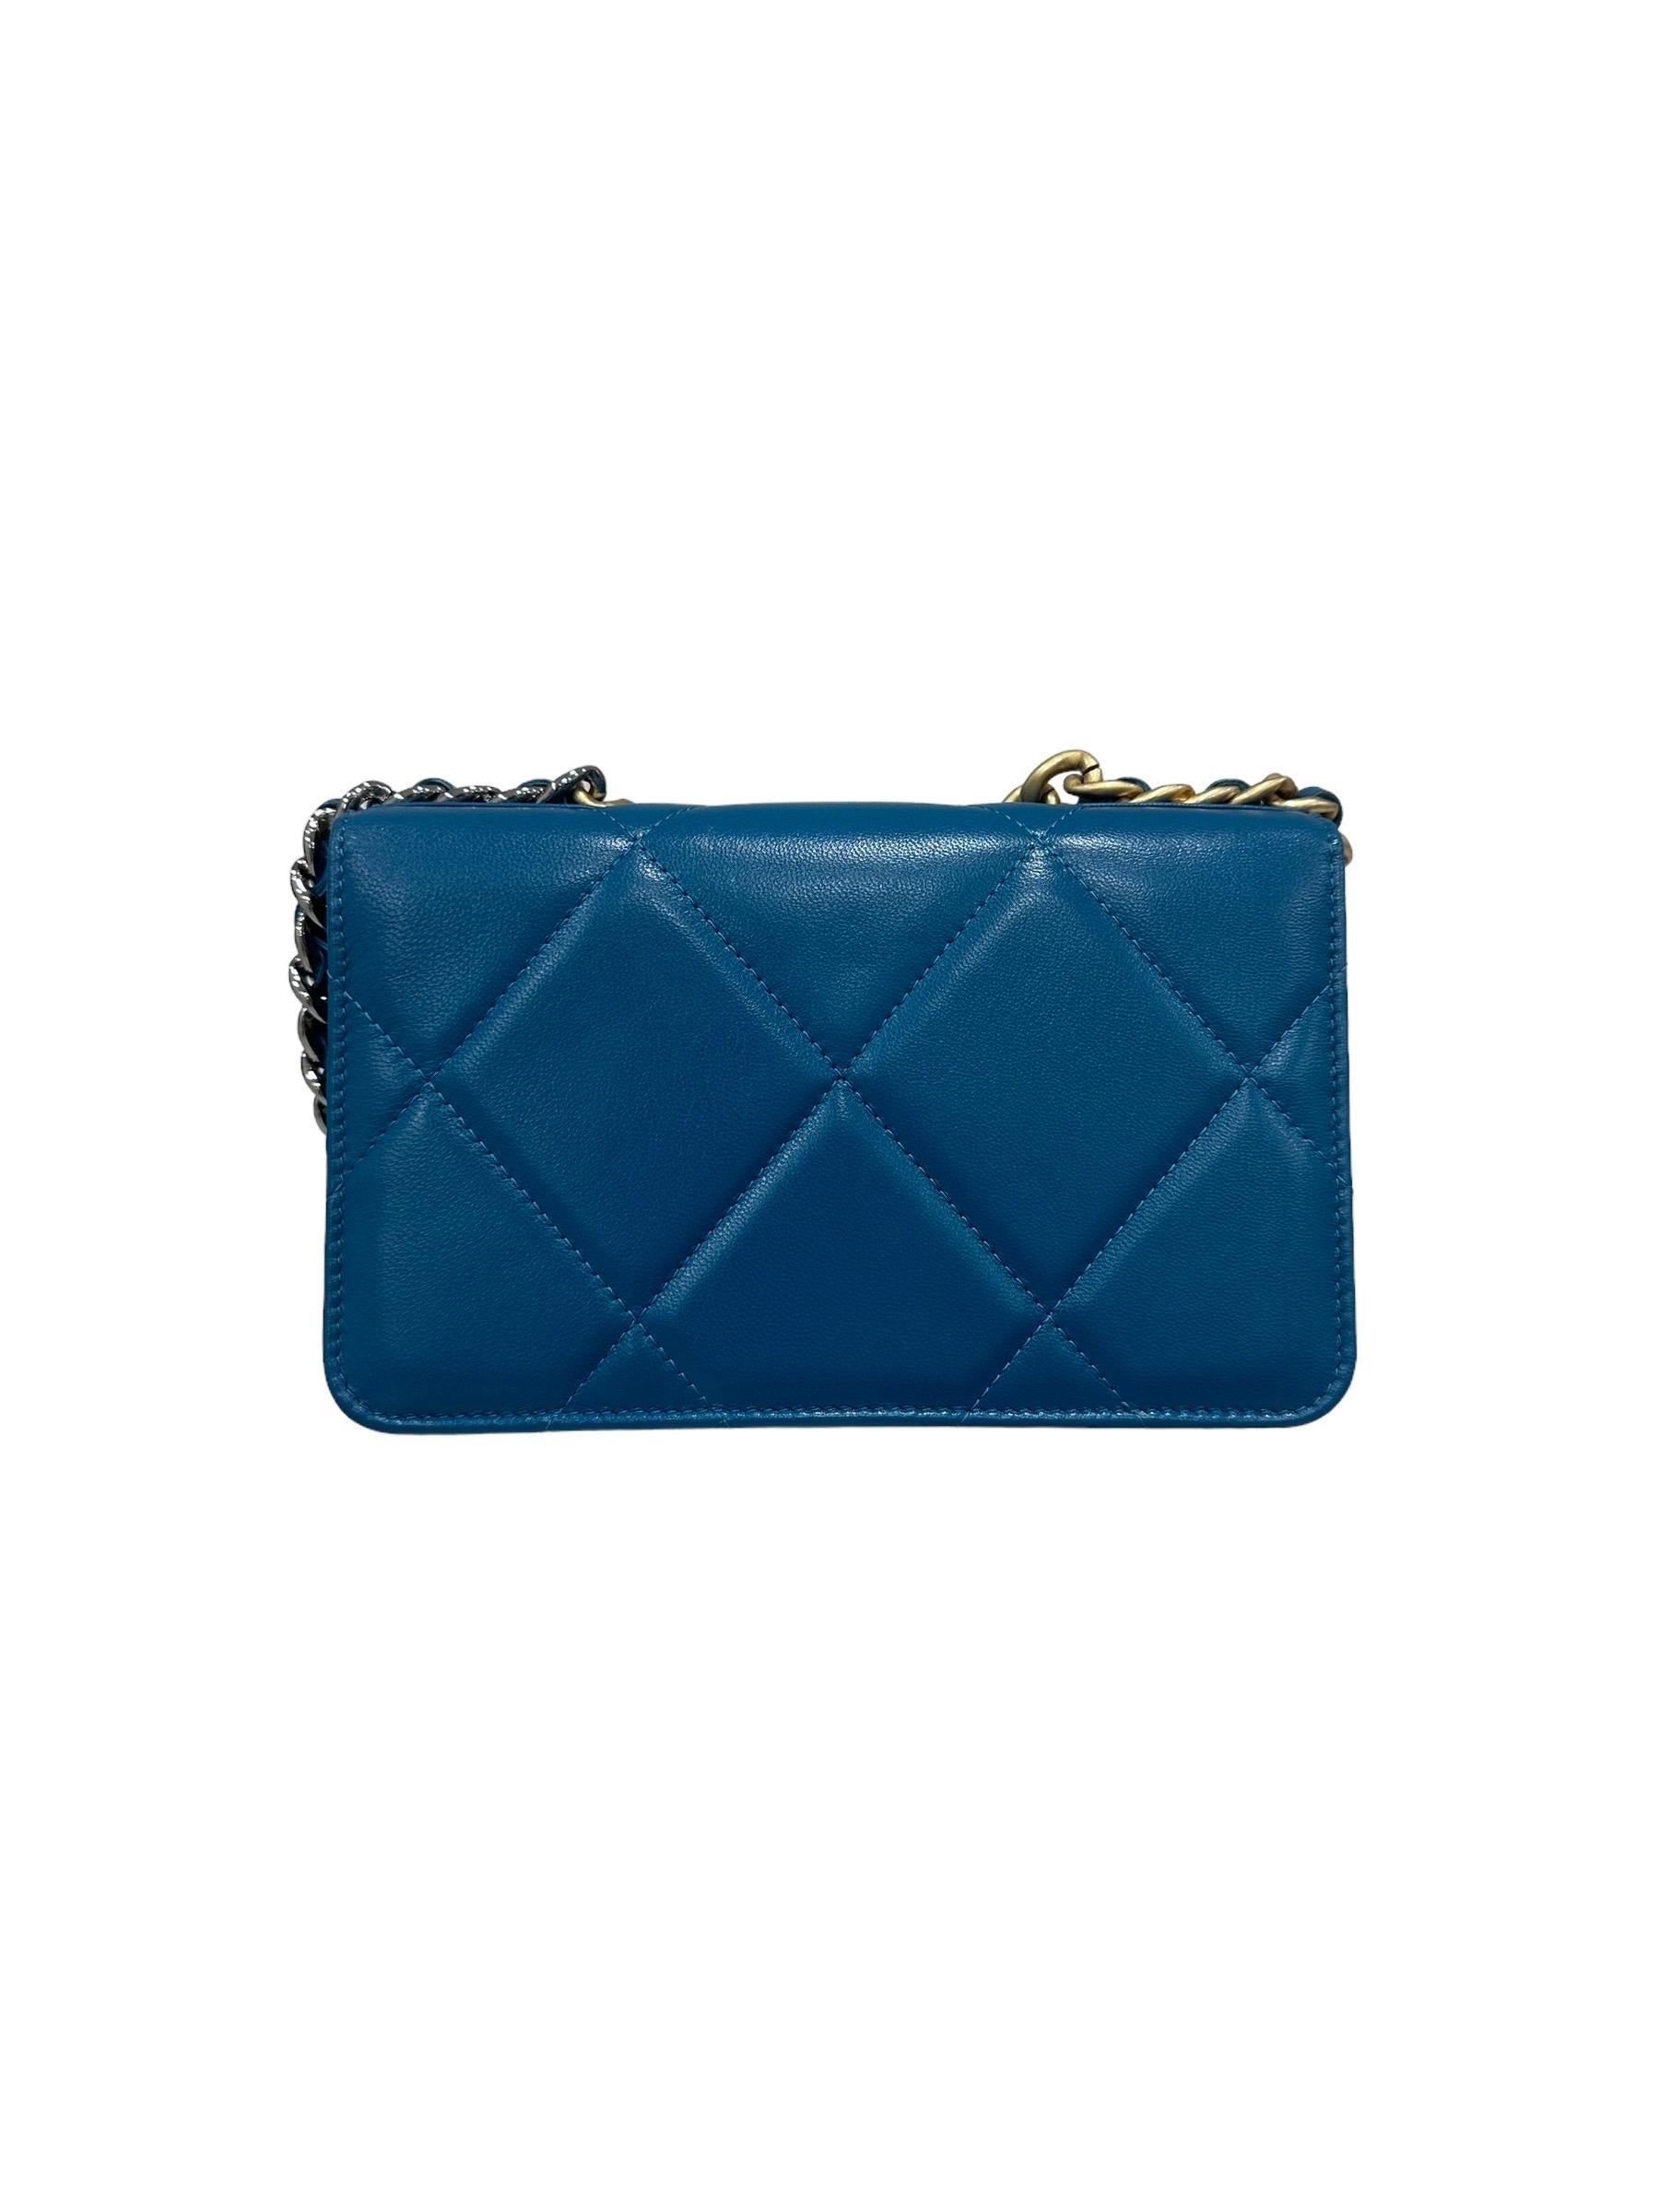 2021 Chanel 19 Wallet On Chain Blue Leather 1